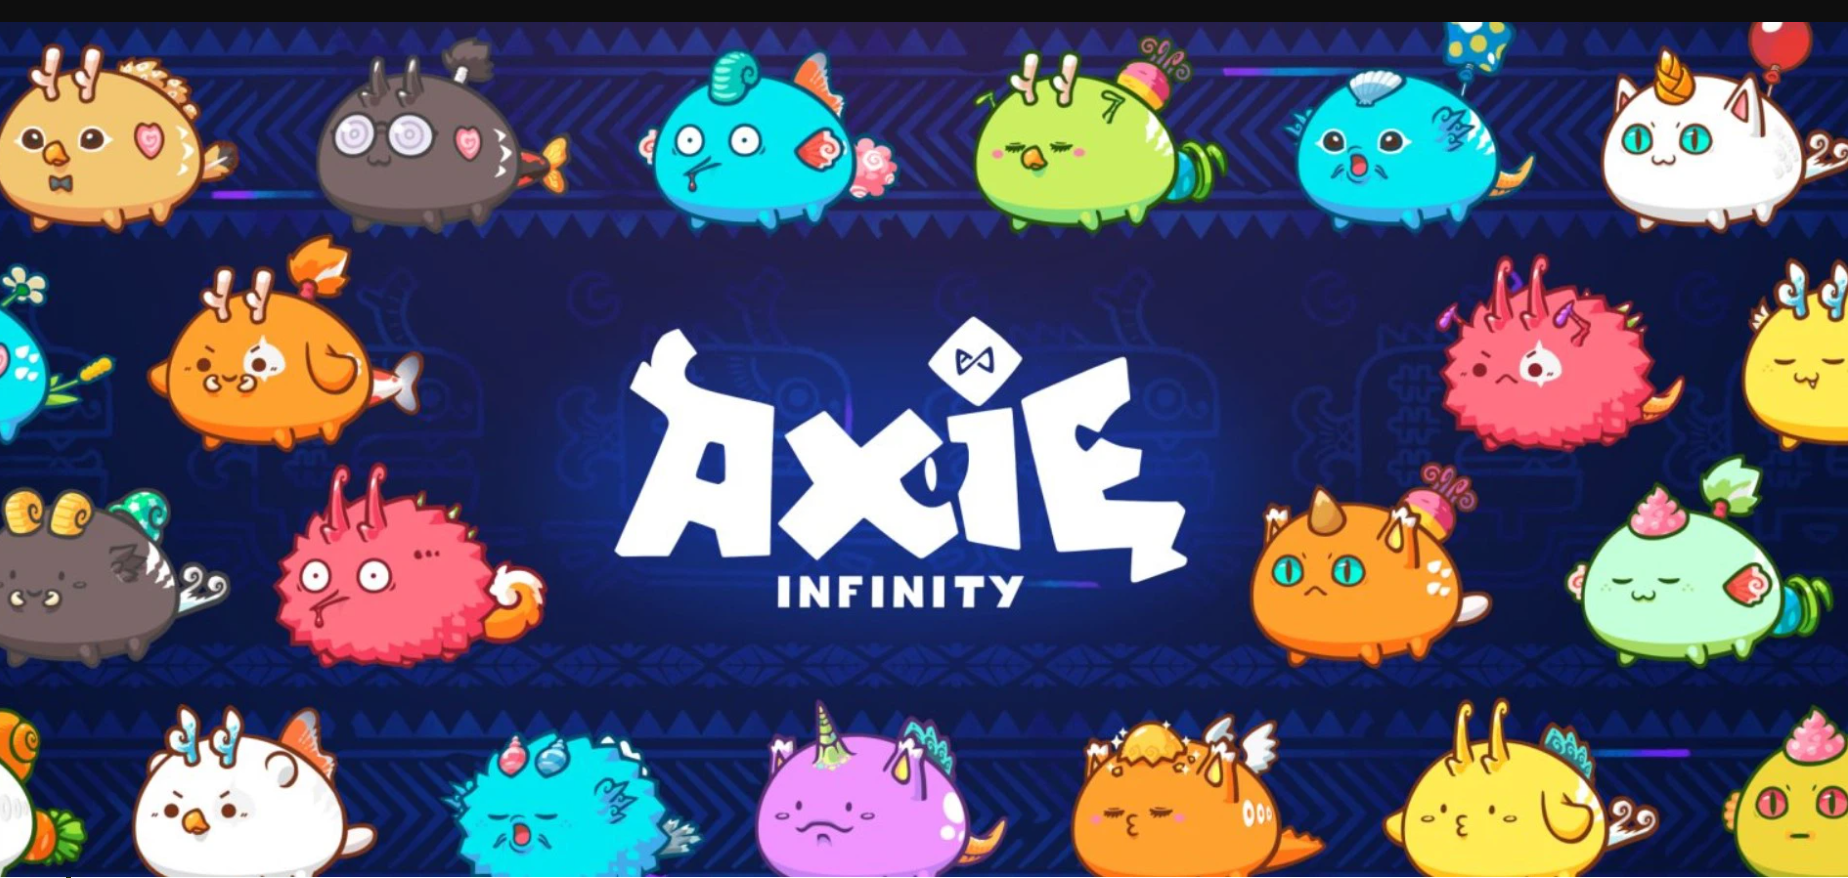 axie-infinity-1637726249.png